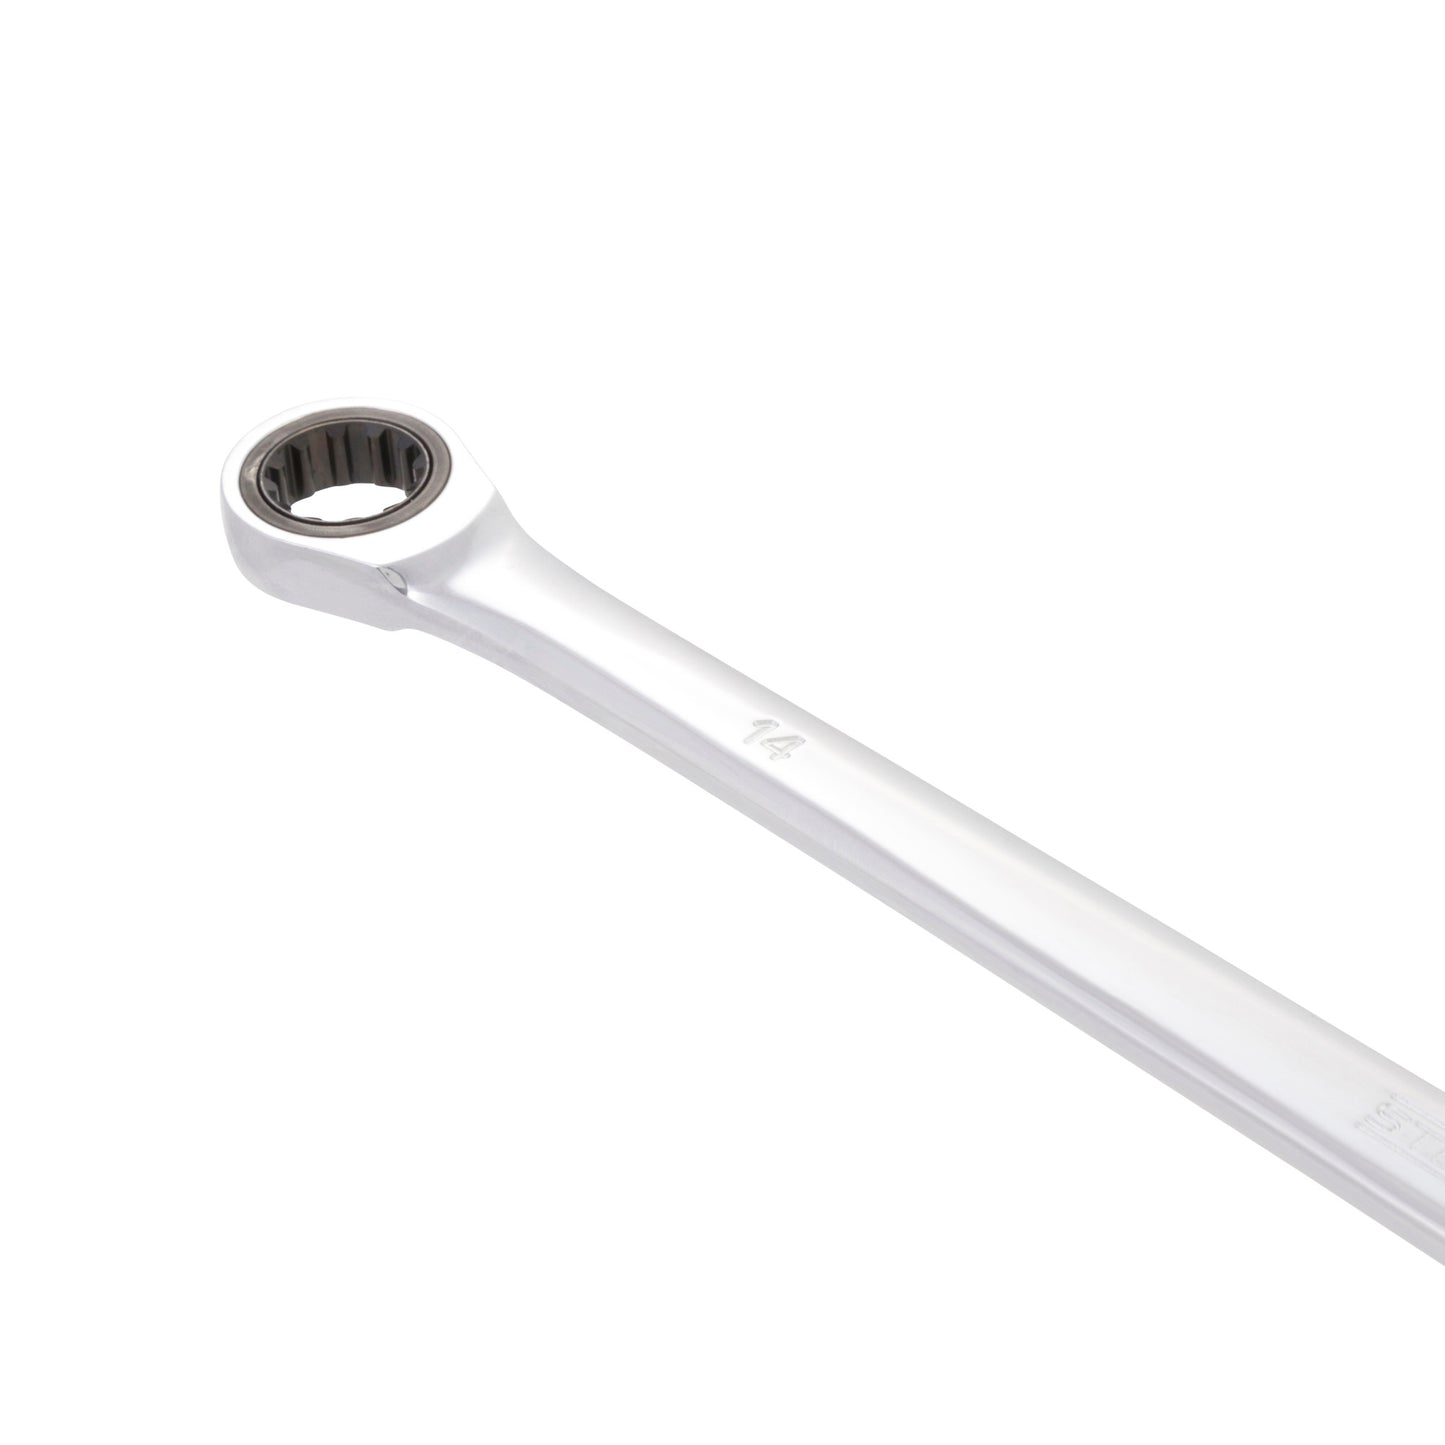 14mm x 15mm Double Box-End Universal Spline Extra Long Ratcheting Wrench